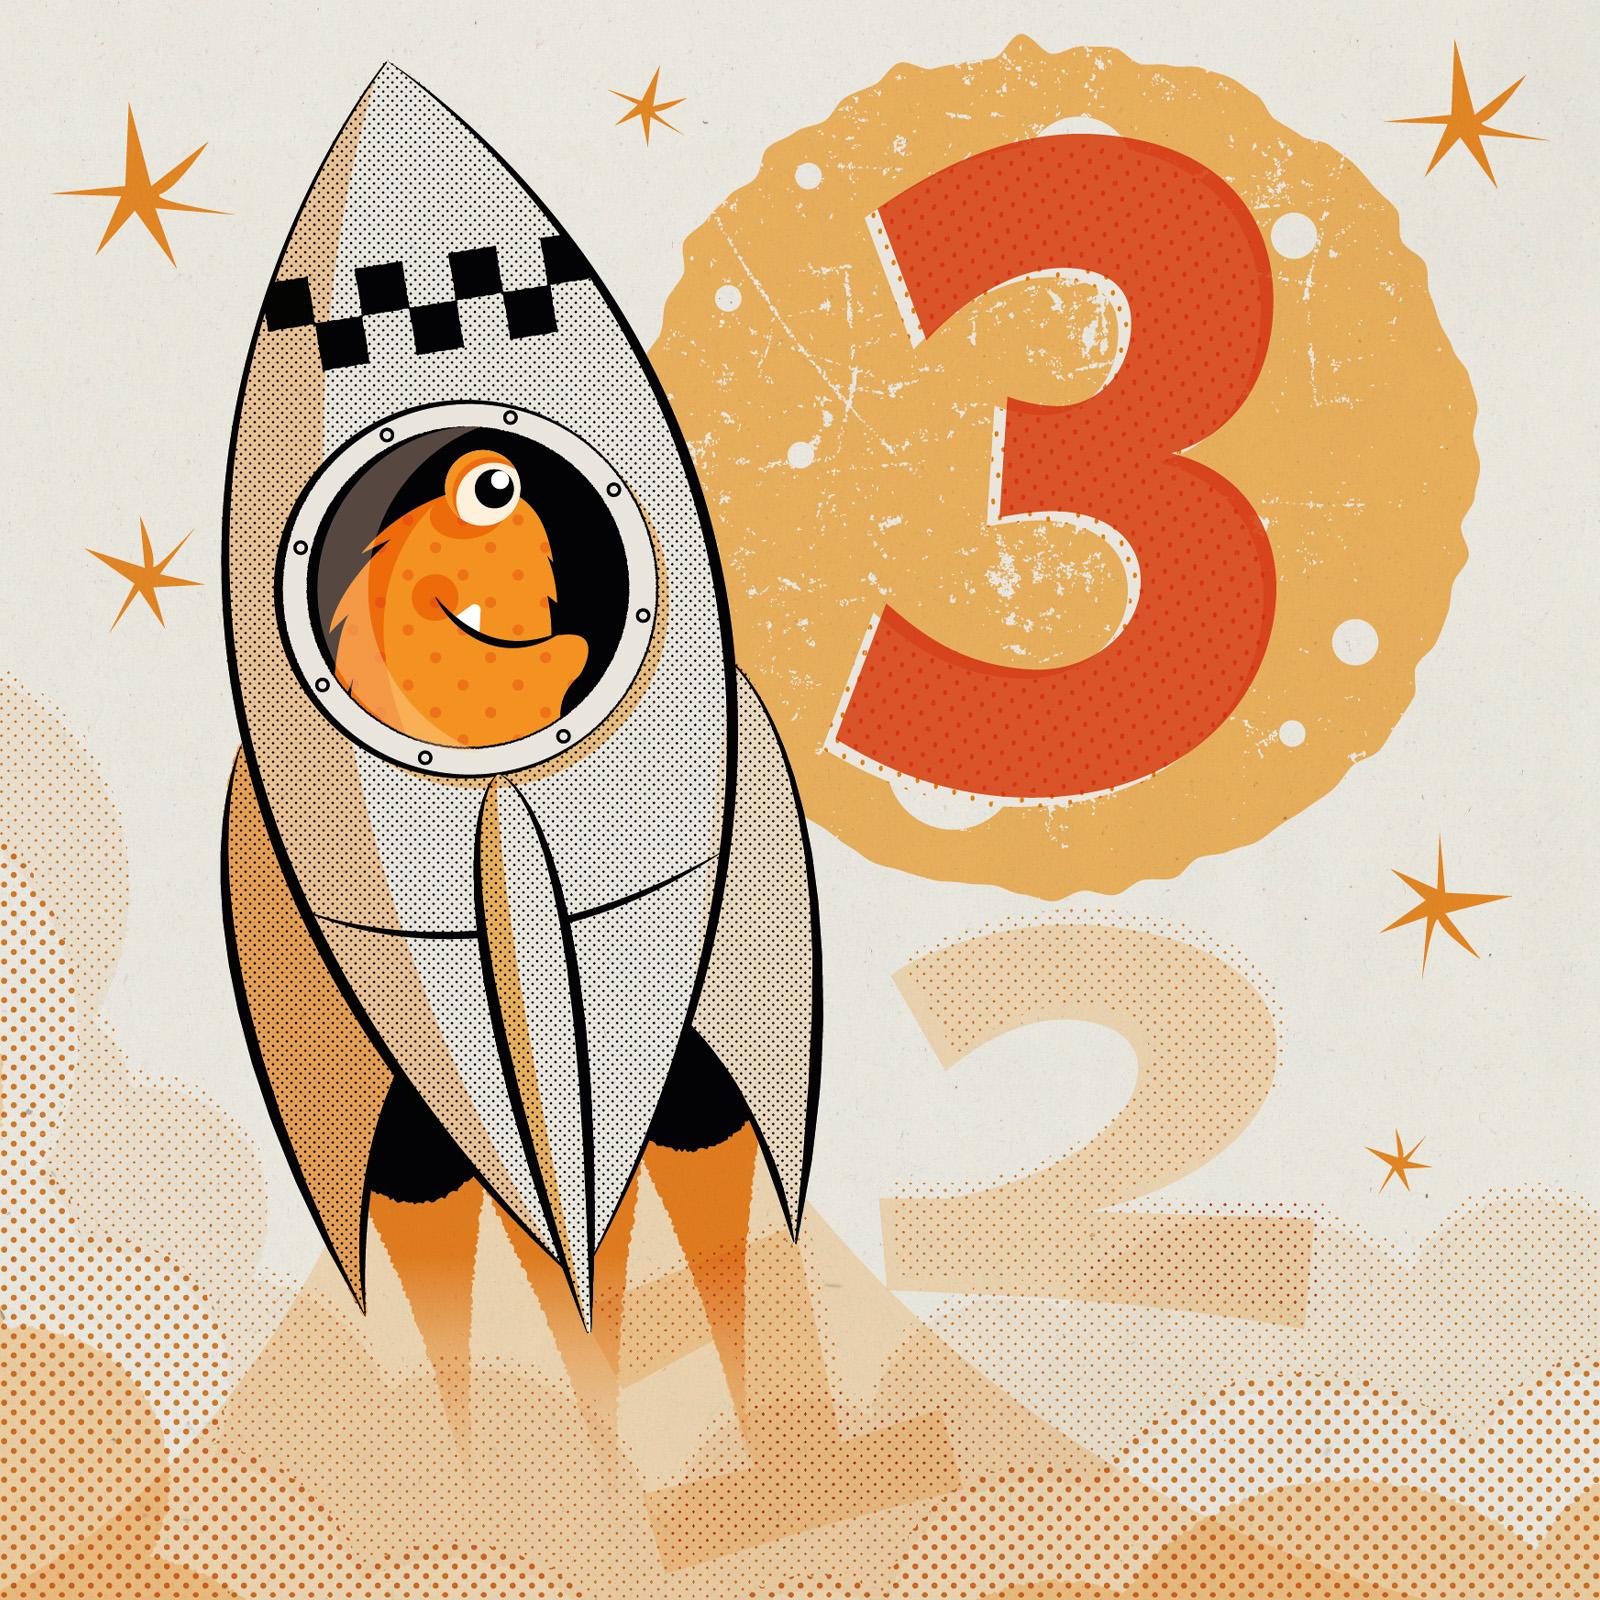 orange furry alien blasting off in a grey retro 50s style rocket behind is an orange number 3 planet with a launch countdown underneath in pale orange